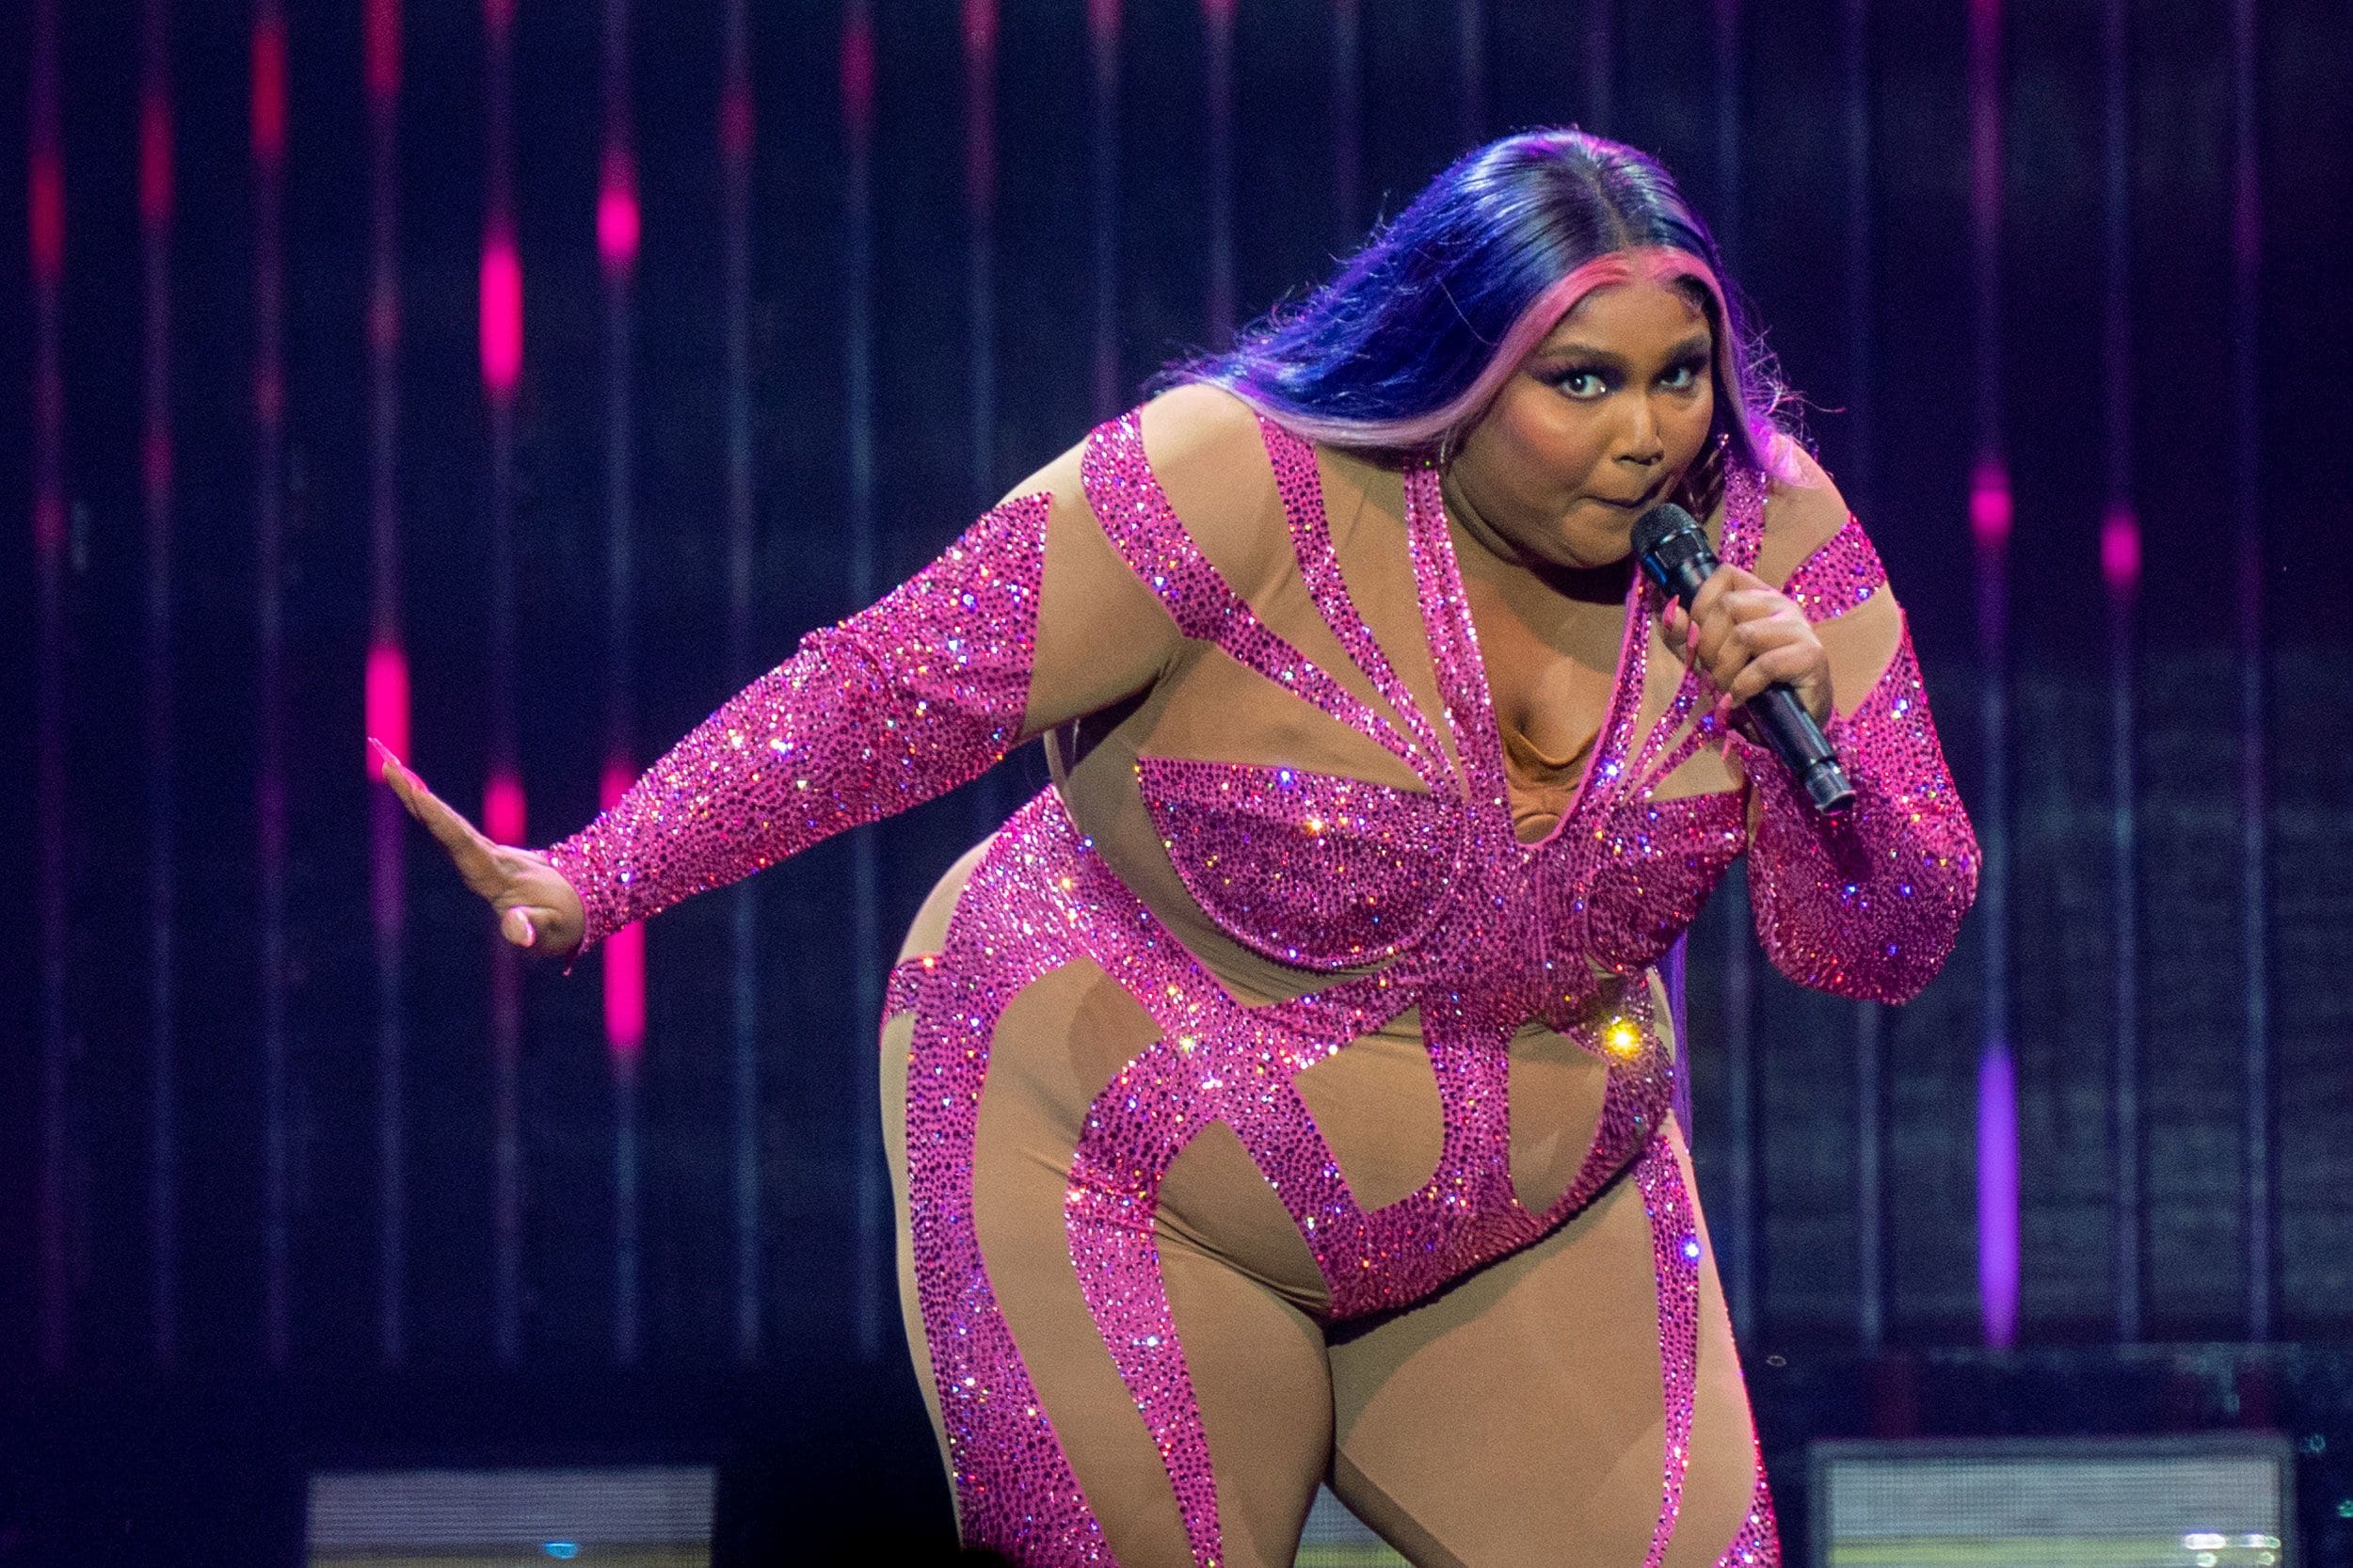 Lizzo Is Furious About AntiTransgender Hate Spewed Online And She Went